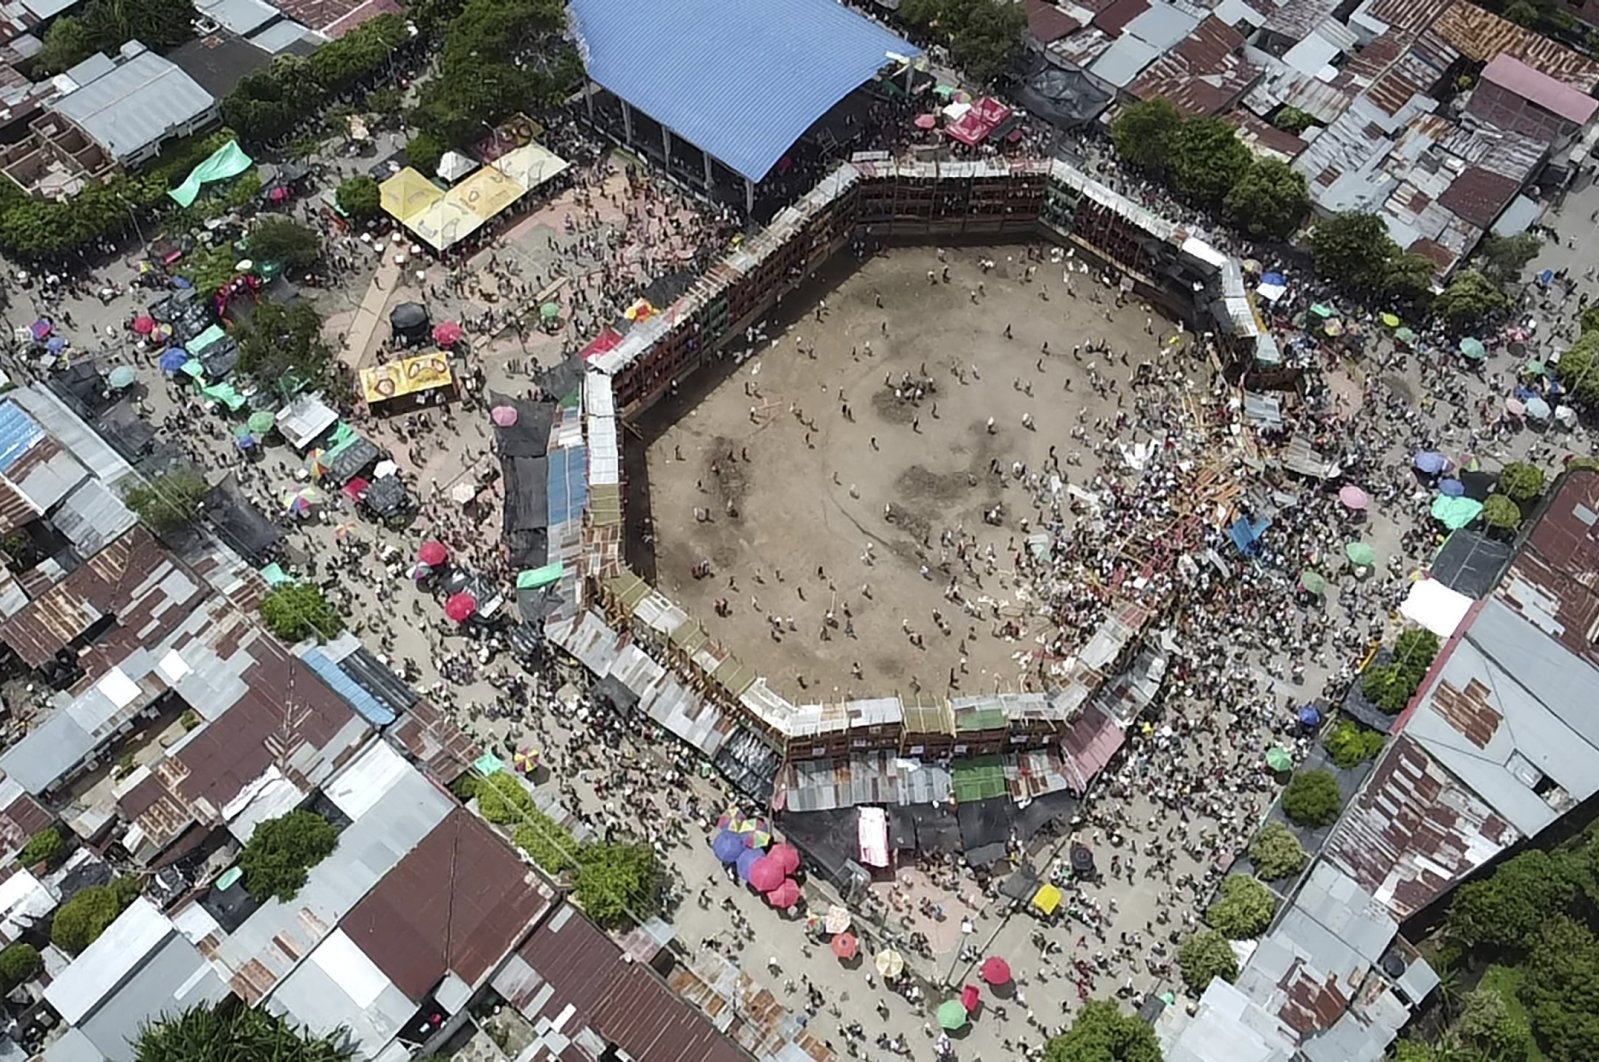 In this image taken from video, spectators gather around the wooden stands that collapsed during a bullfight in El Espinal, Tolima state, Colombia, June 26, 2022. (AP Photo)